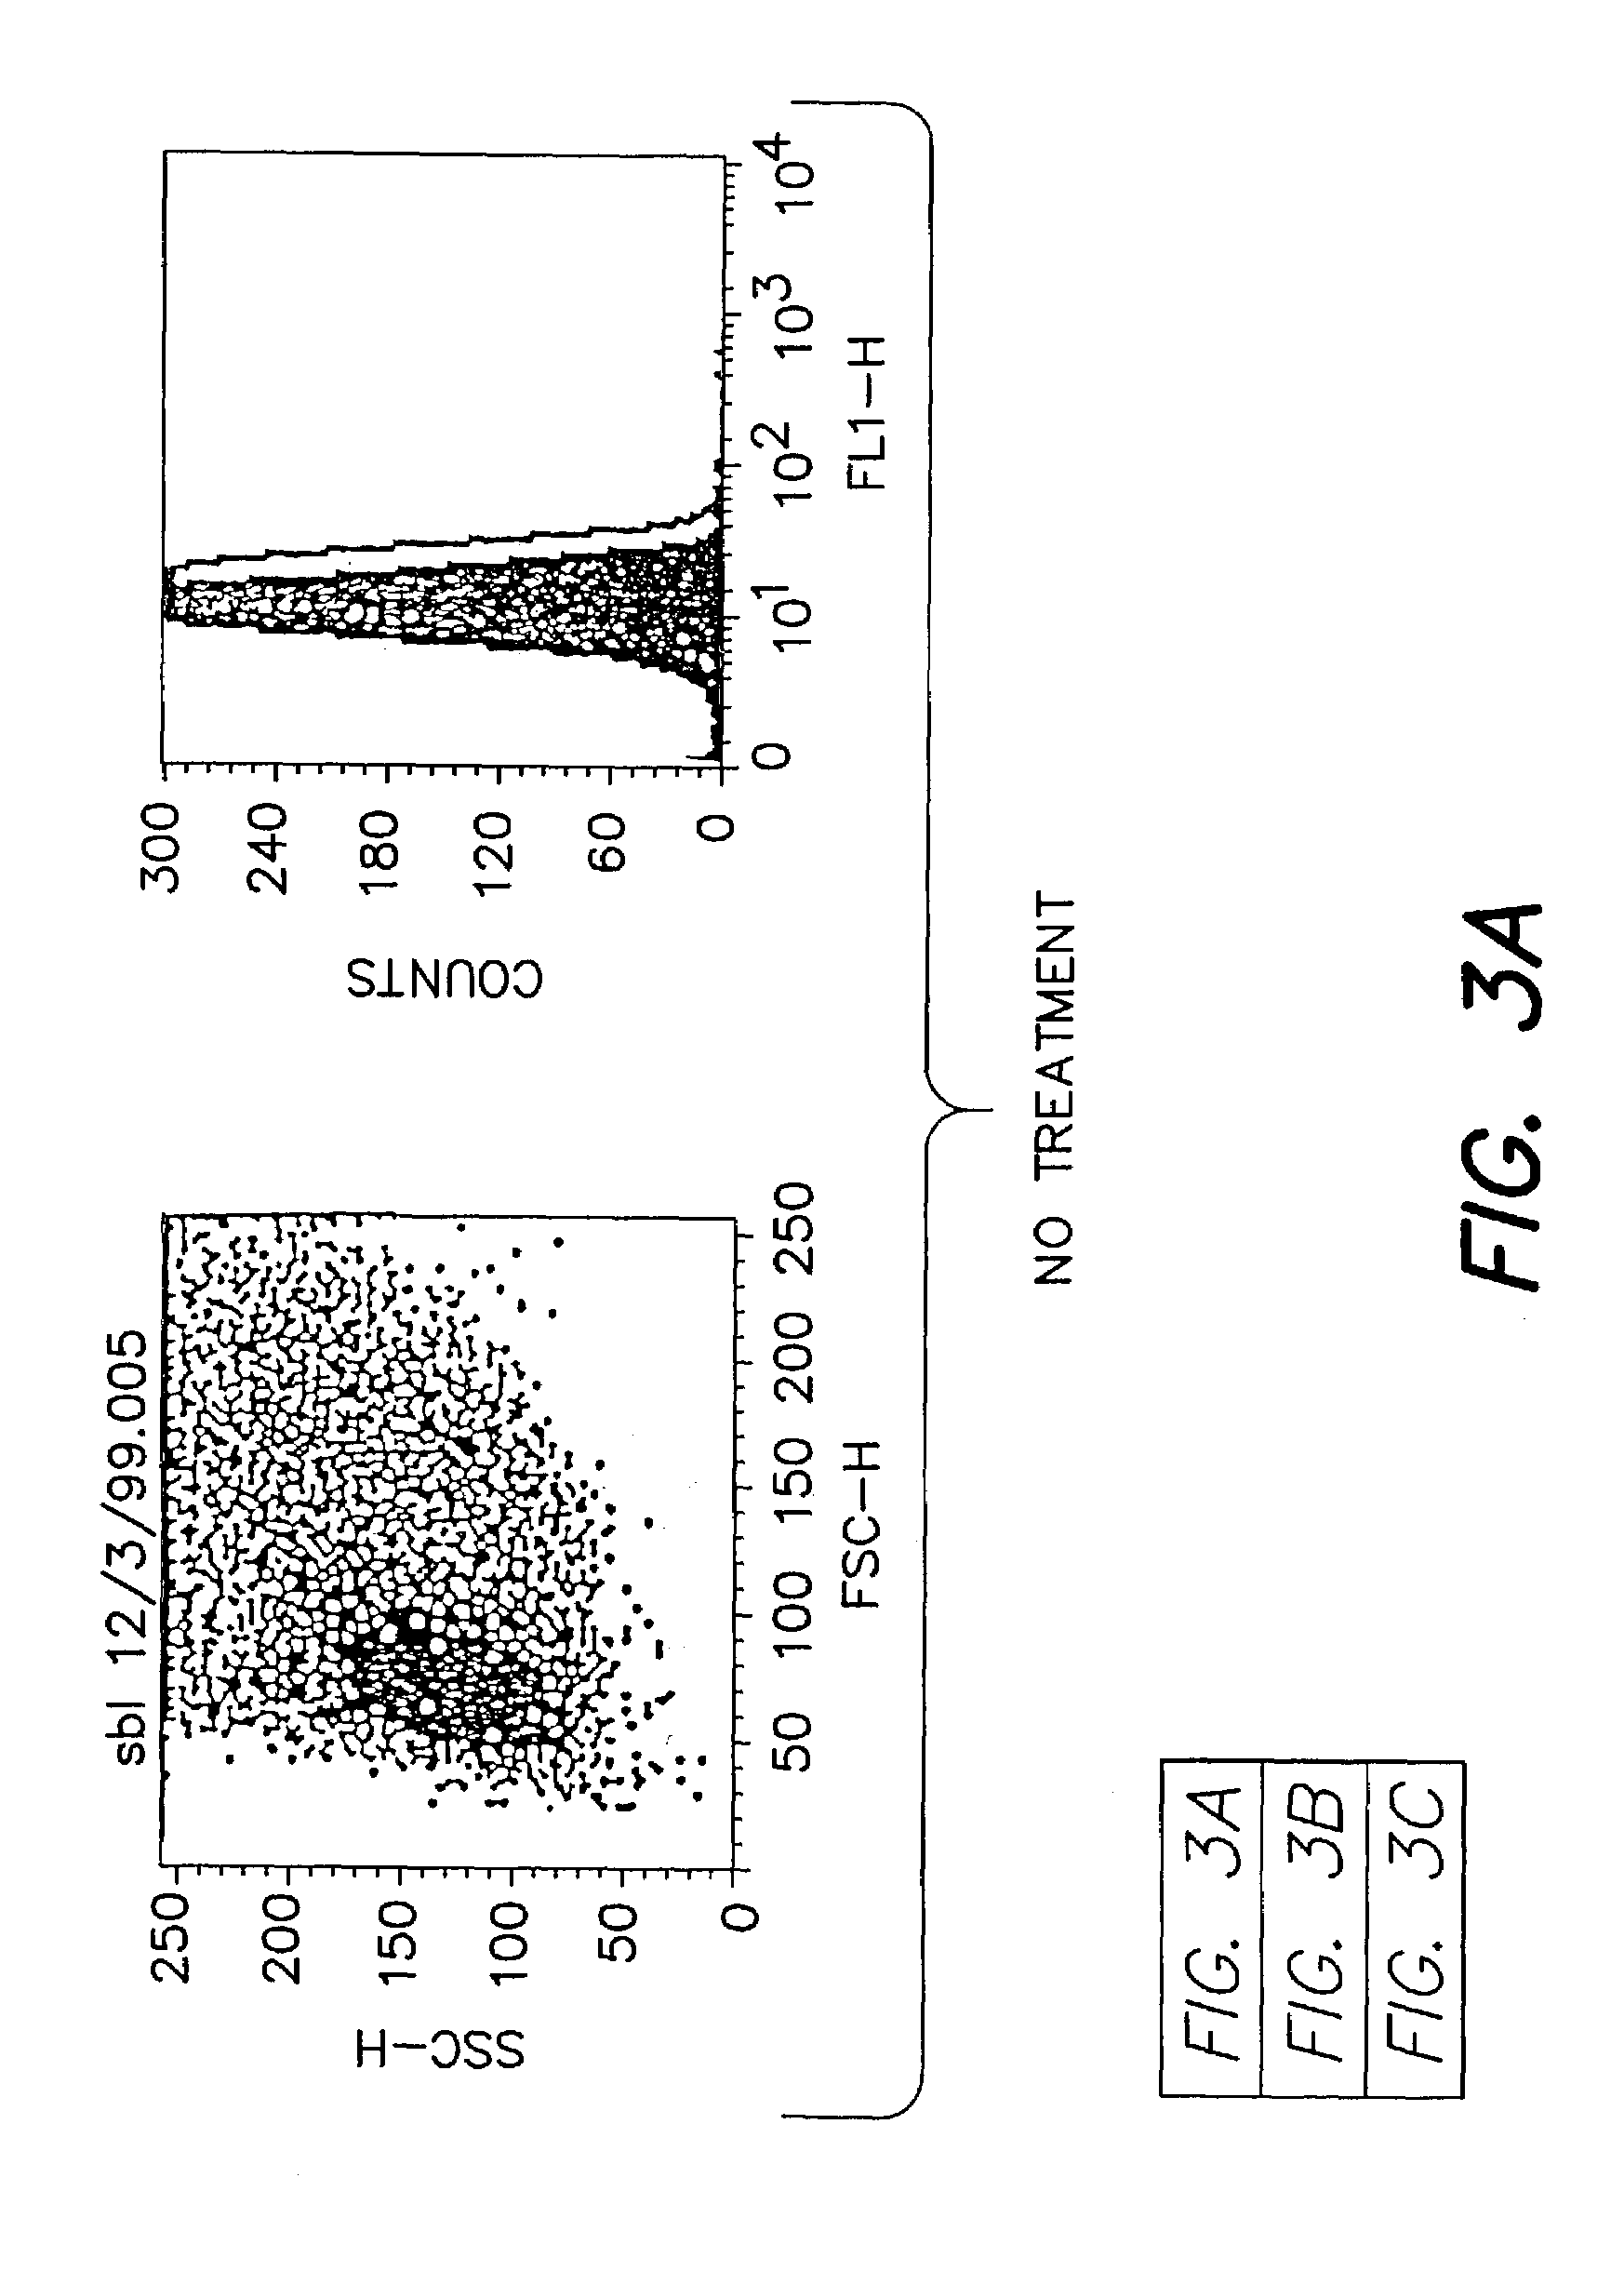 Compositions and methods for regulating metabolism in plants